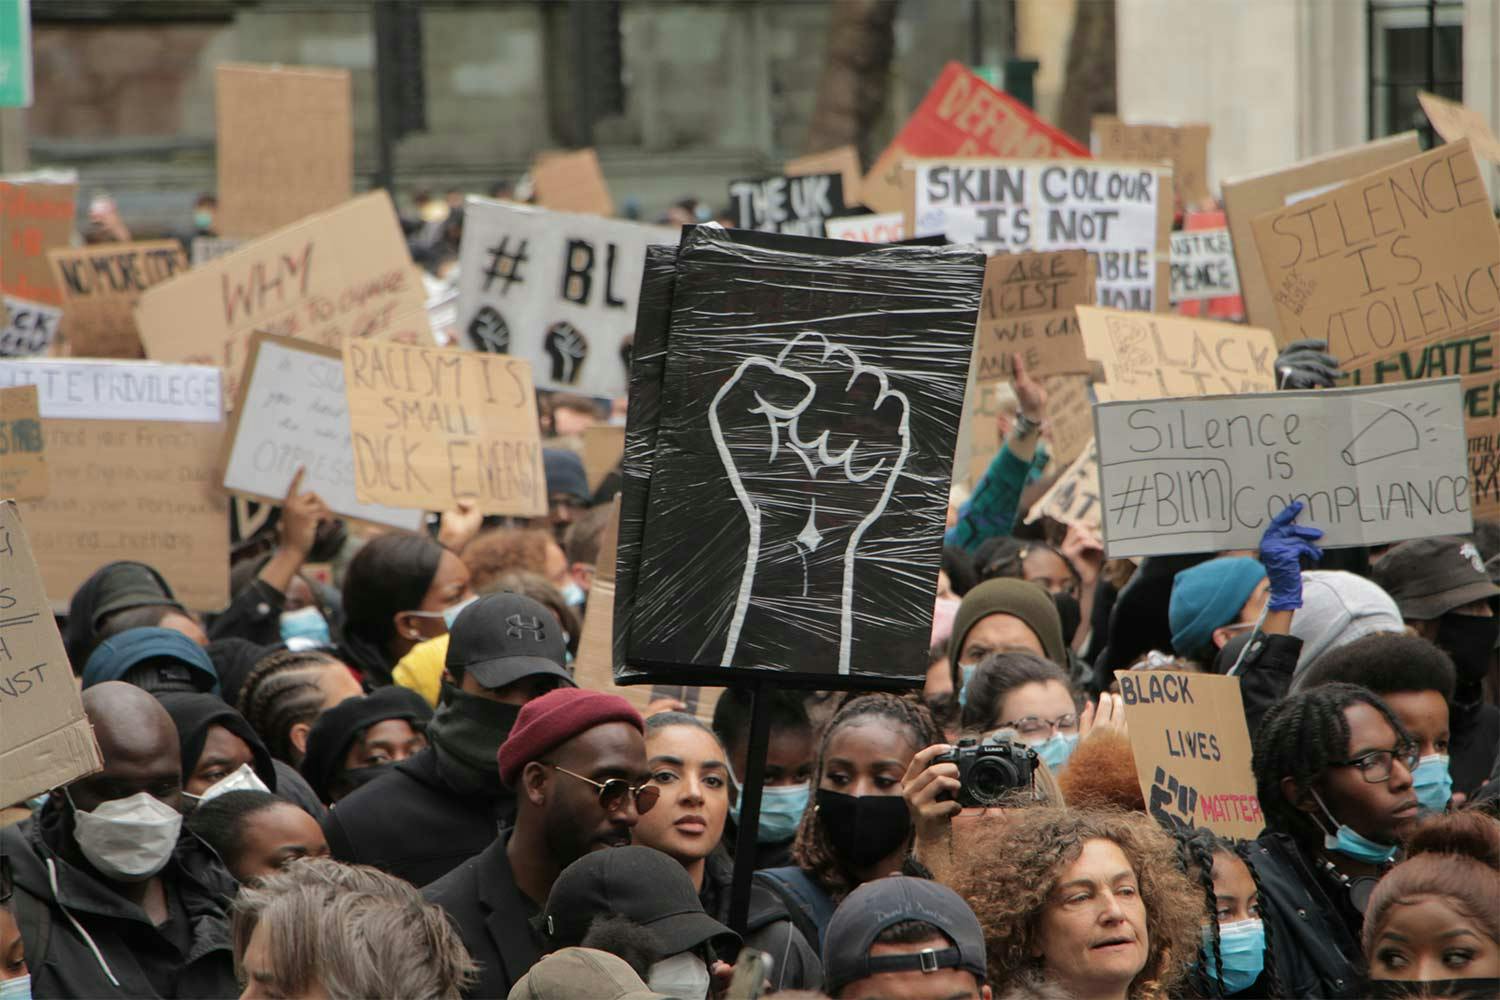 A crowd of BLM protesters hold signs. In the middle, a black cardboard sign shows a fist held upward, drawn in white paint.